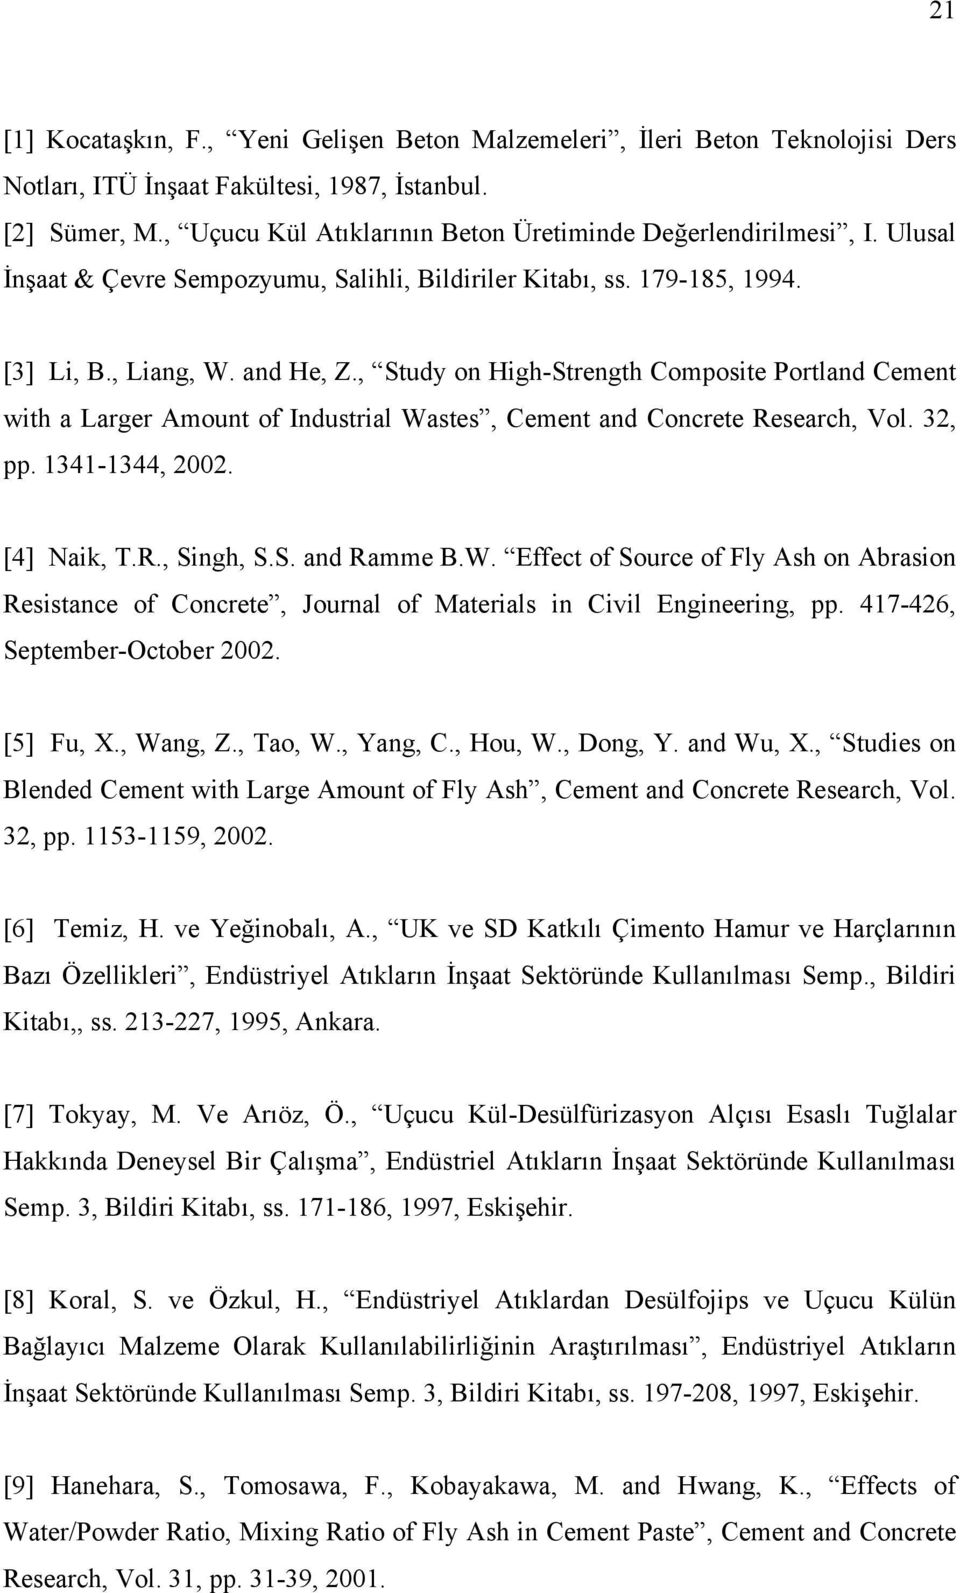 , Study on High-Strength Composite Portland Cement with a Larger Amount of Industrial Wastes, Cement and Concrete Research, Vol. 32, pp. 1341-1344, 2002. [4] Naik, T.R., Singh, S.S. and Ramme B.W. Effect of Source of Fly Ash on Abrasion Resistance of Concrete, Journal of Materials in Civil Engineering, pp.